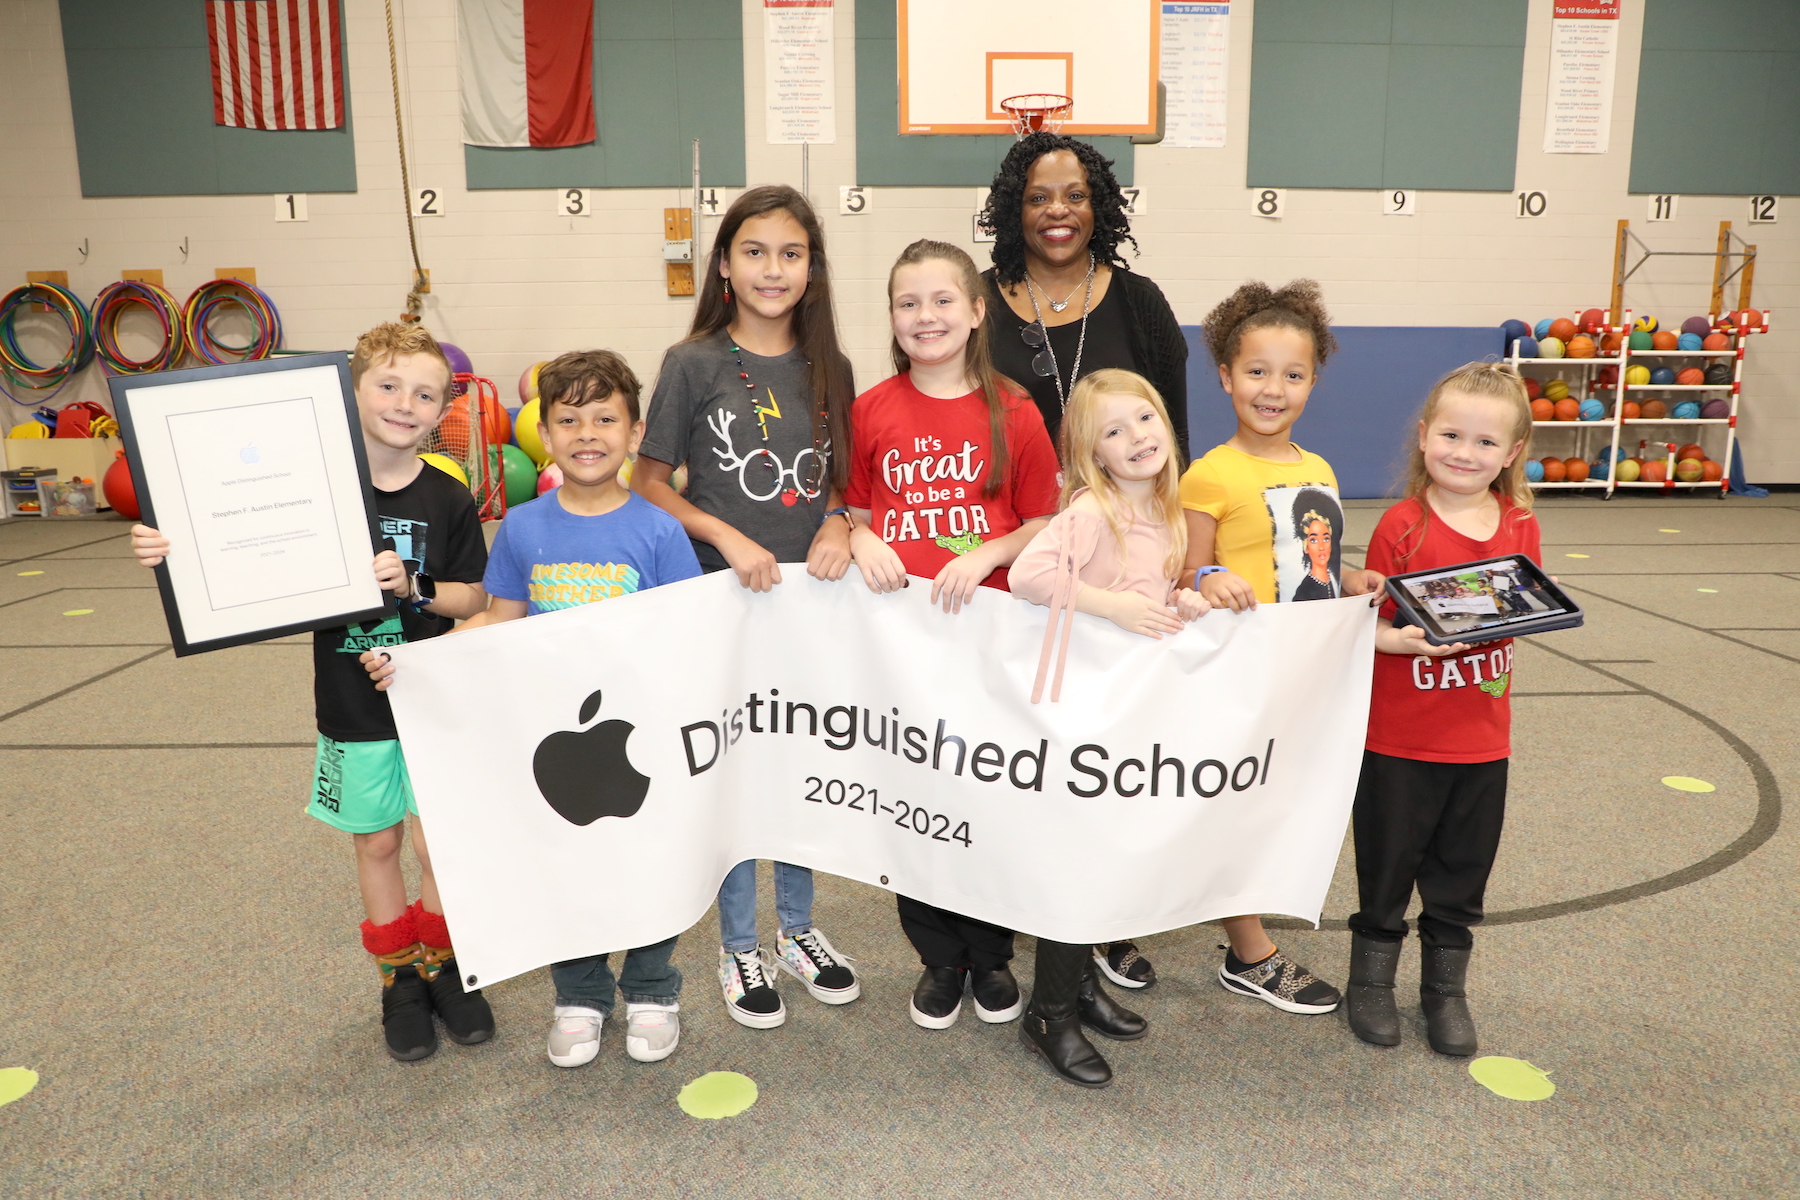 an apple respresentative poses with students holding the Apple Distinguished School banner